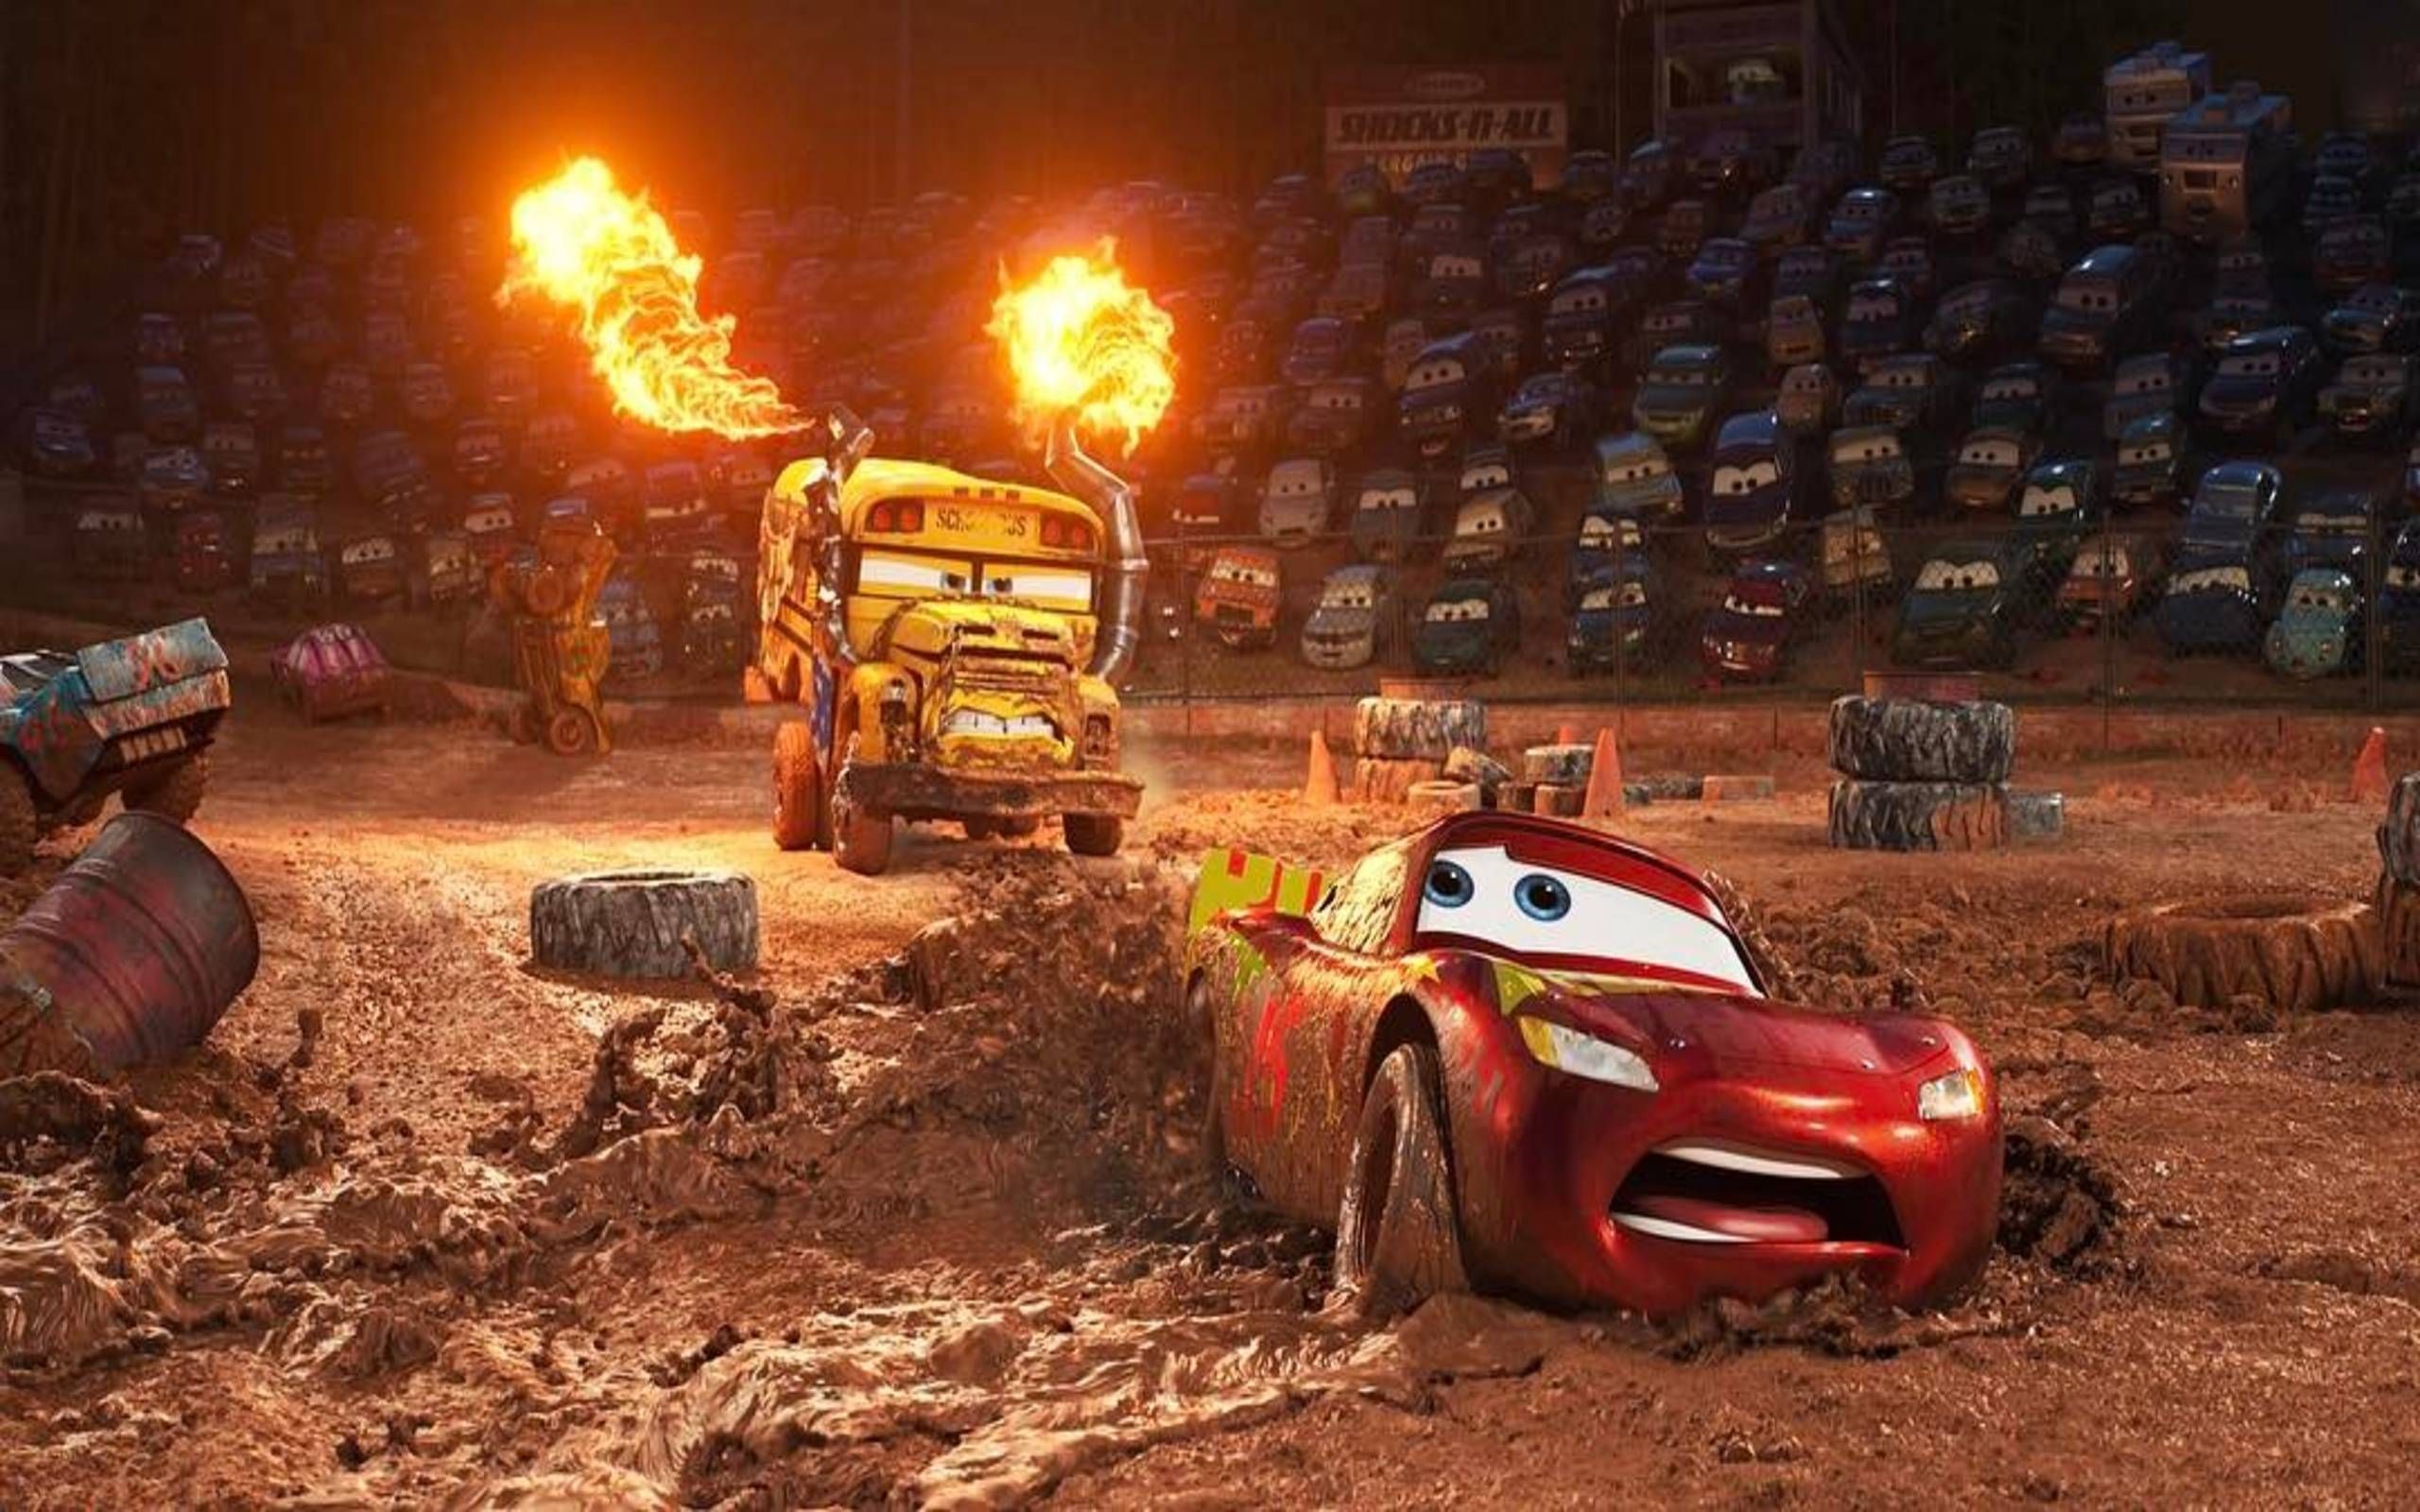 3' Here's what to expect from the new Cars movie (spoiler alert)